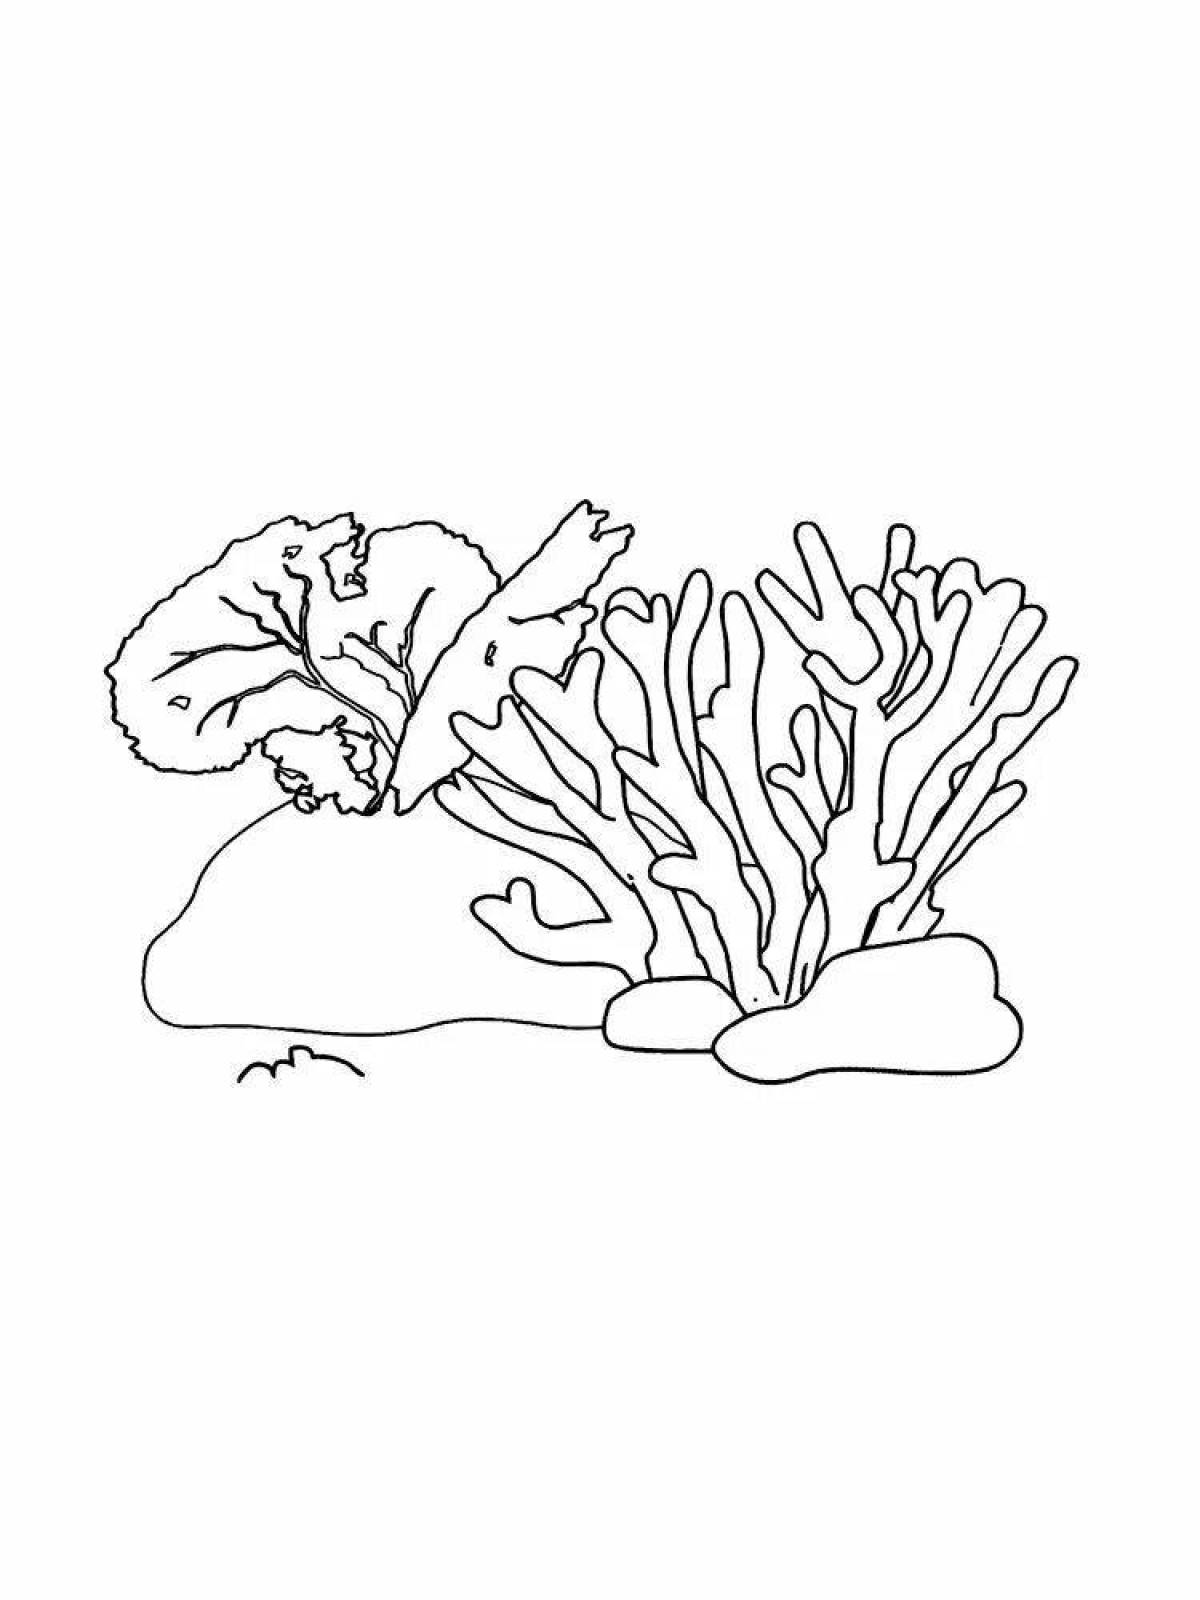 Coloring coral for kids